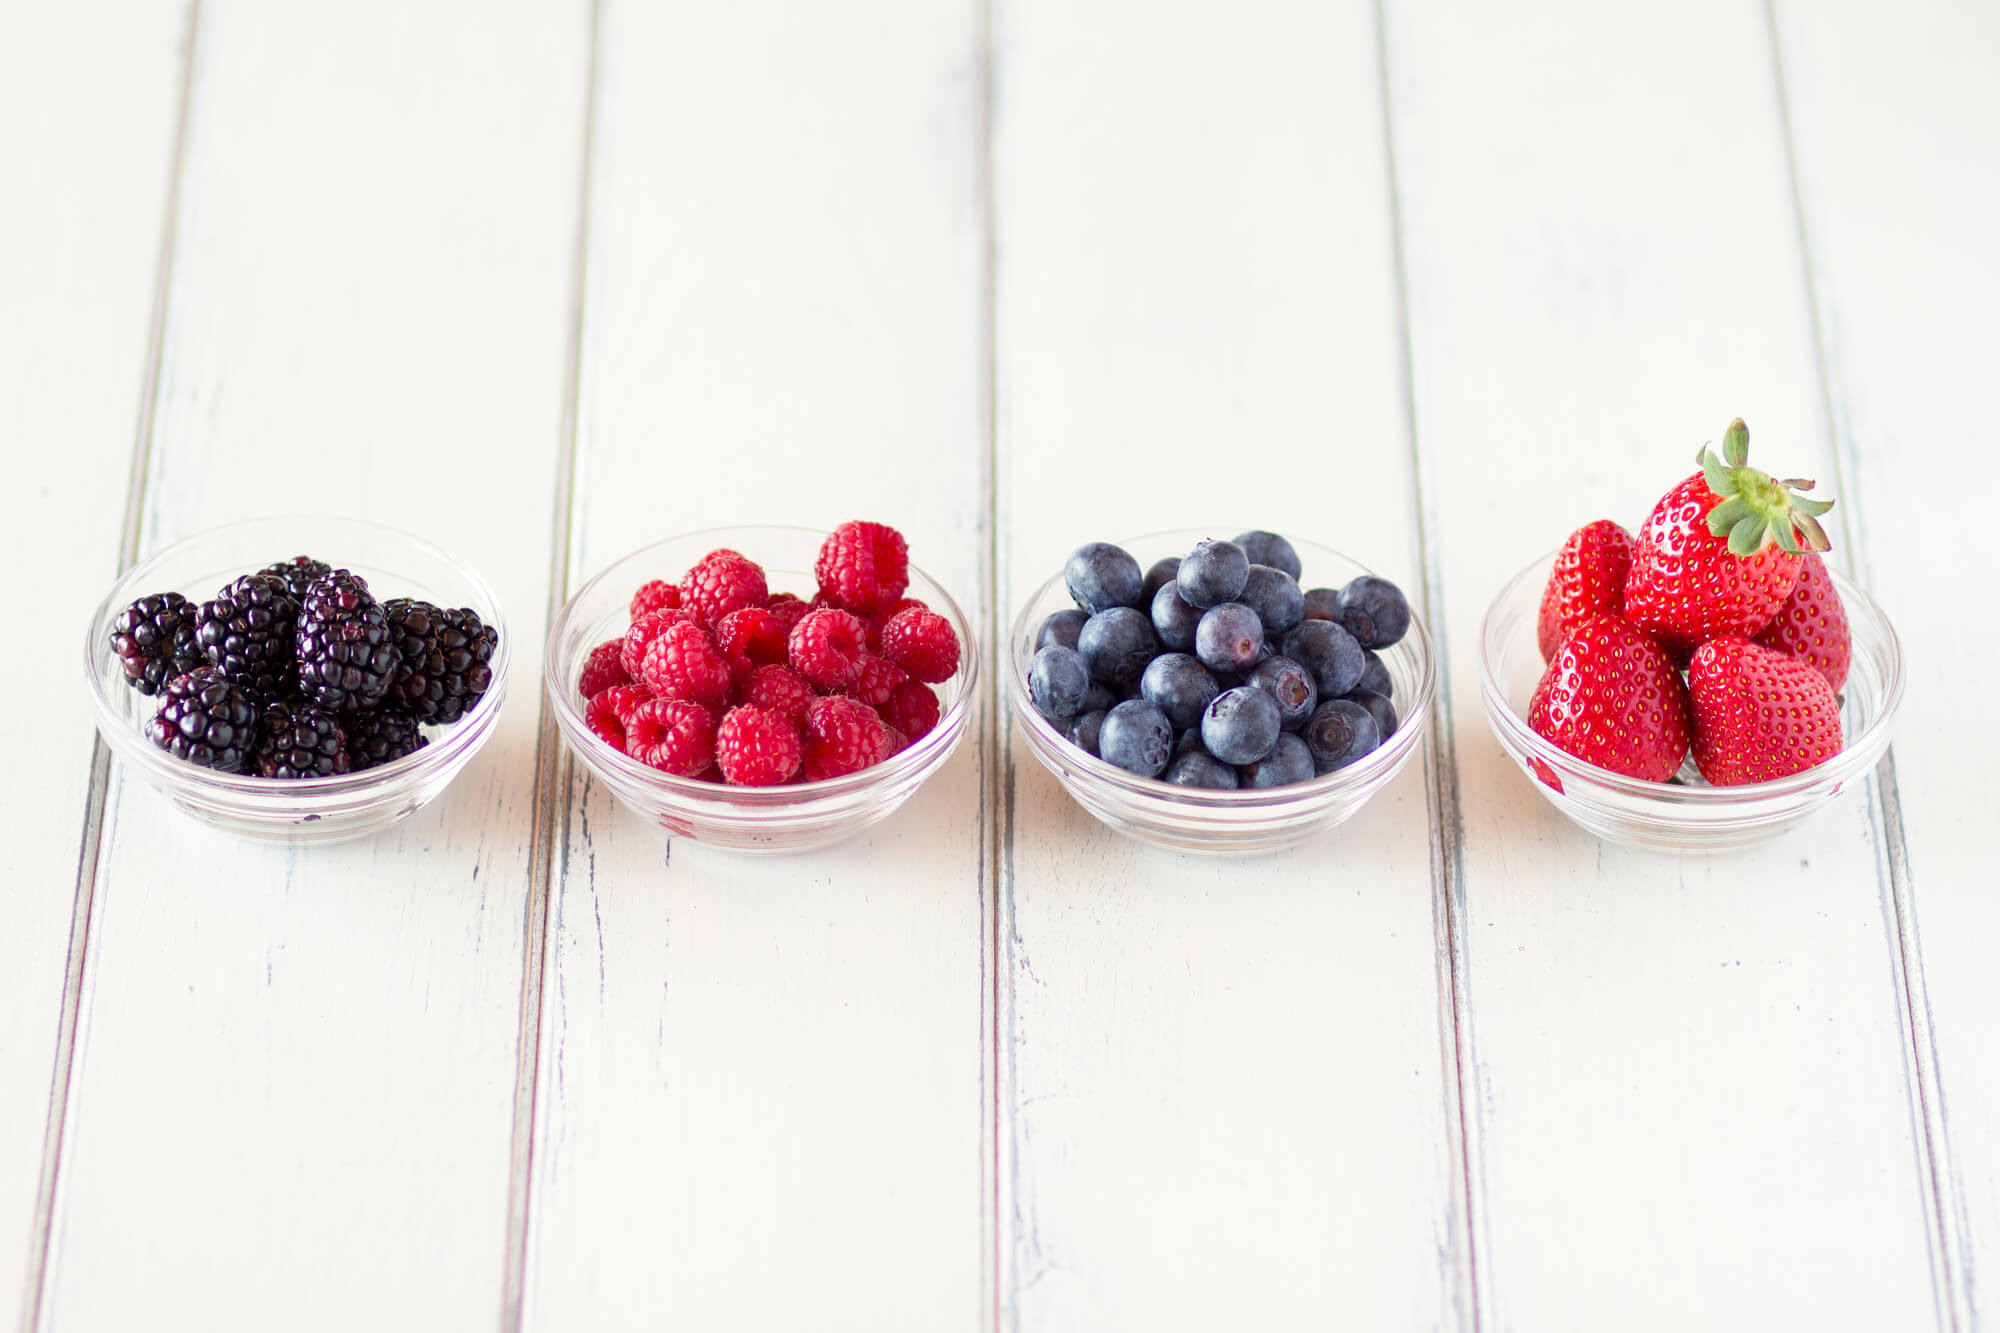 Shelf life of berries | How to store and handle berries to maximize shelf life